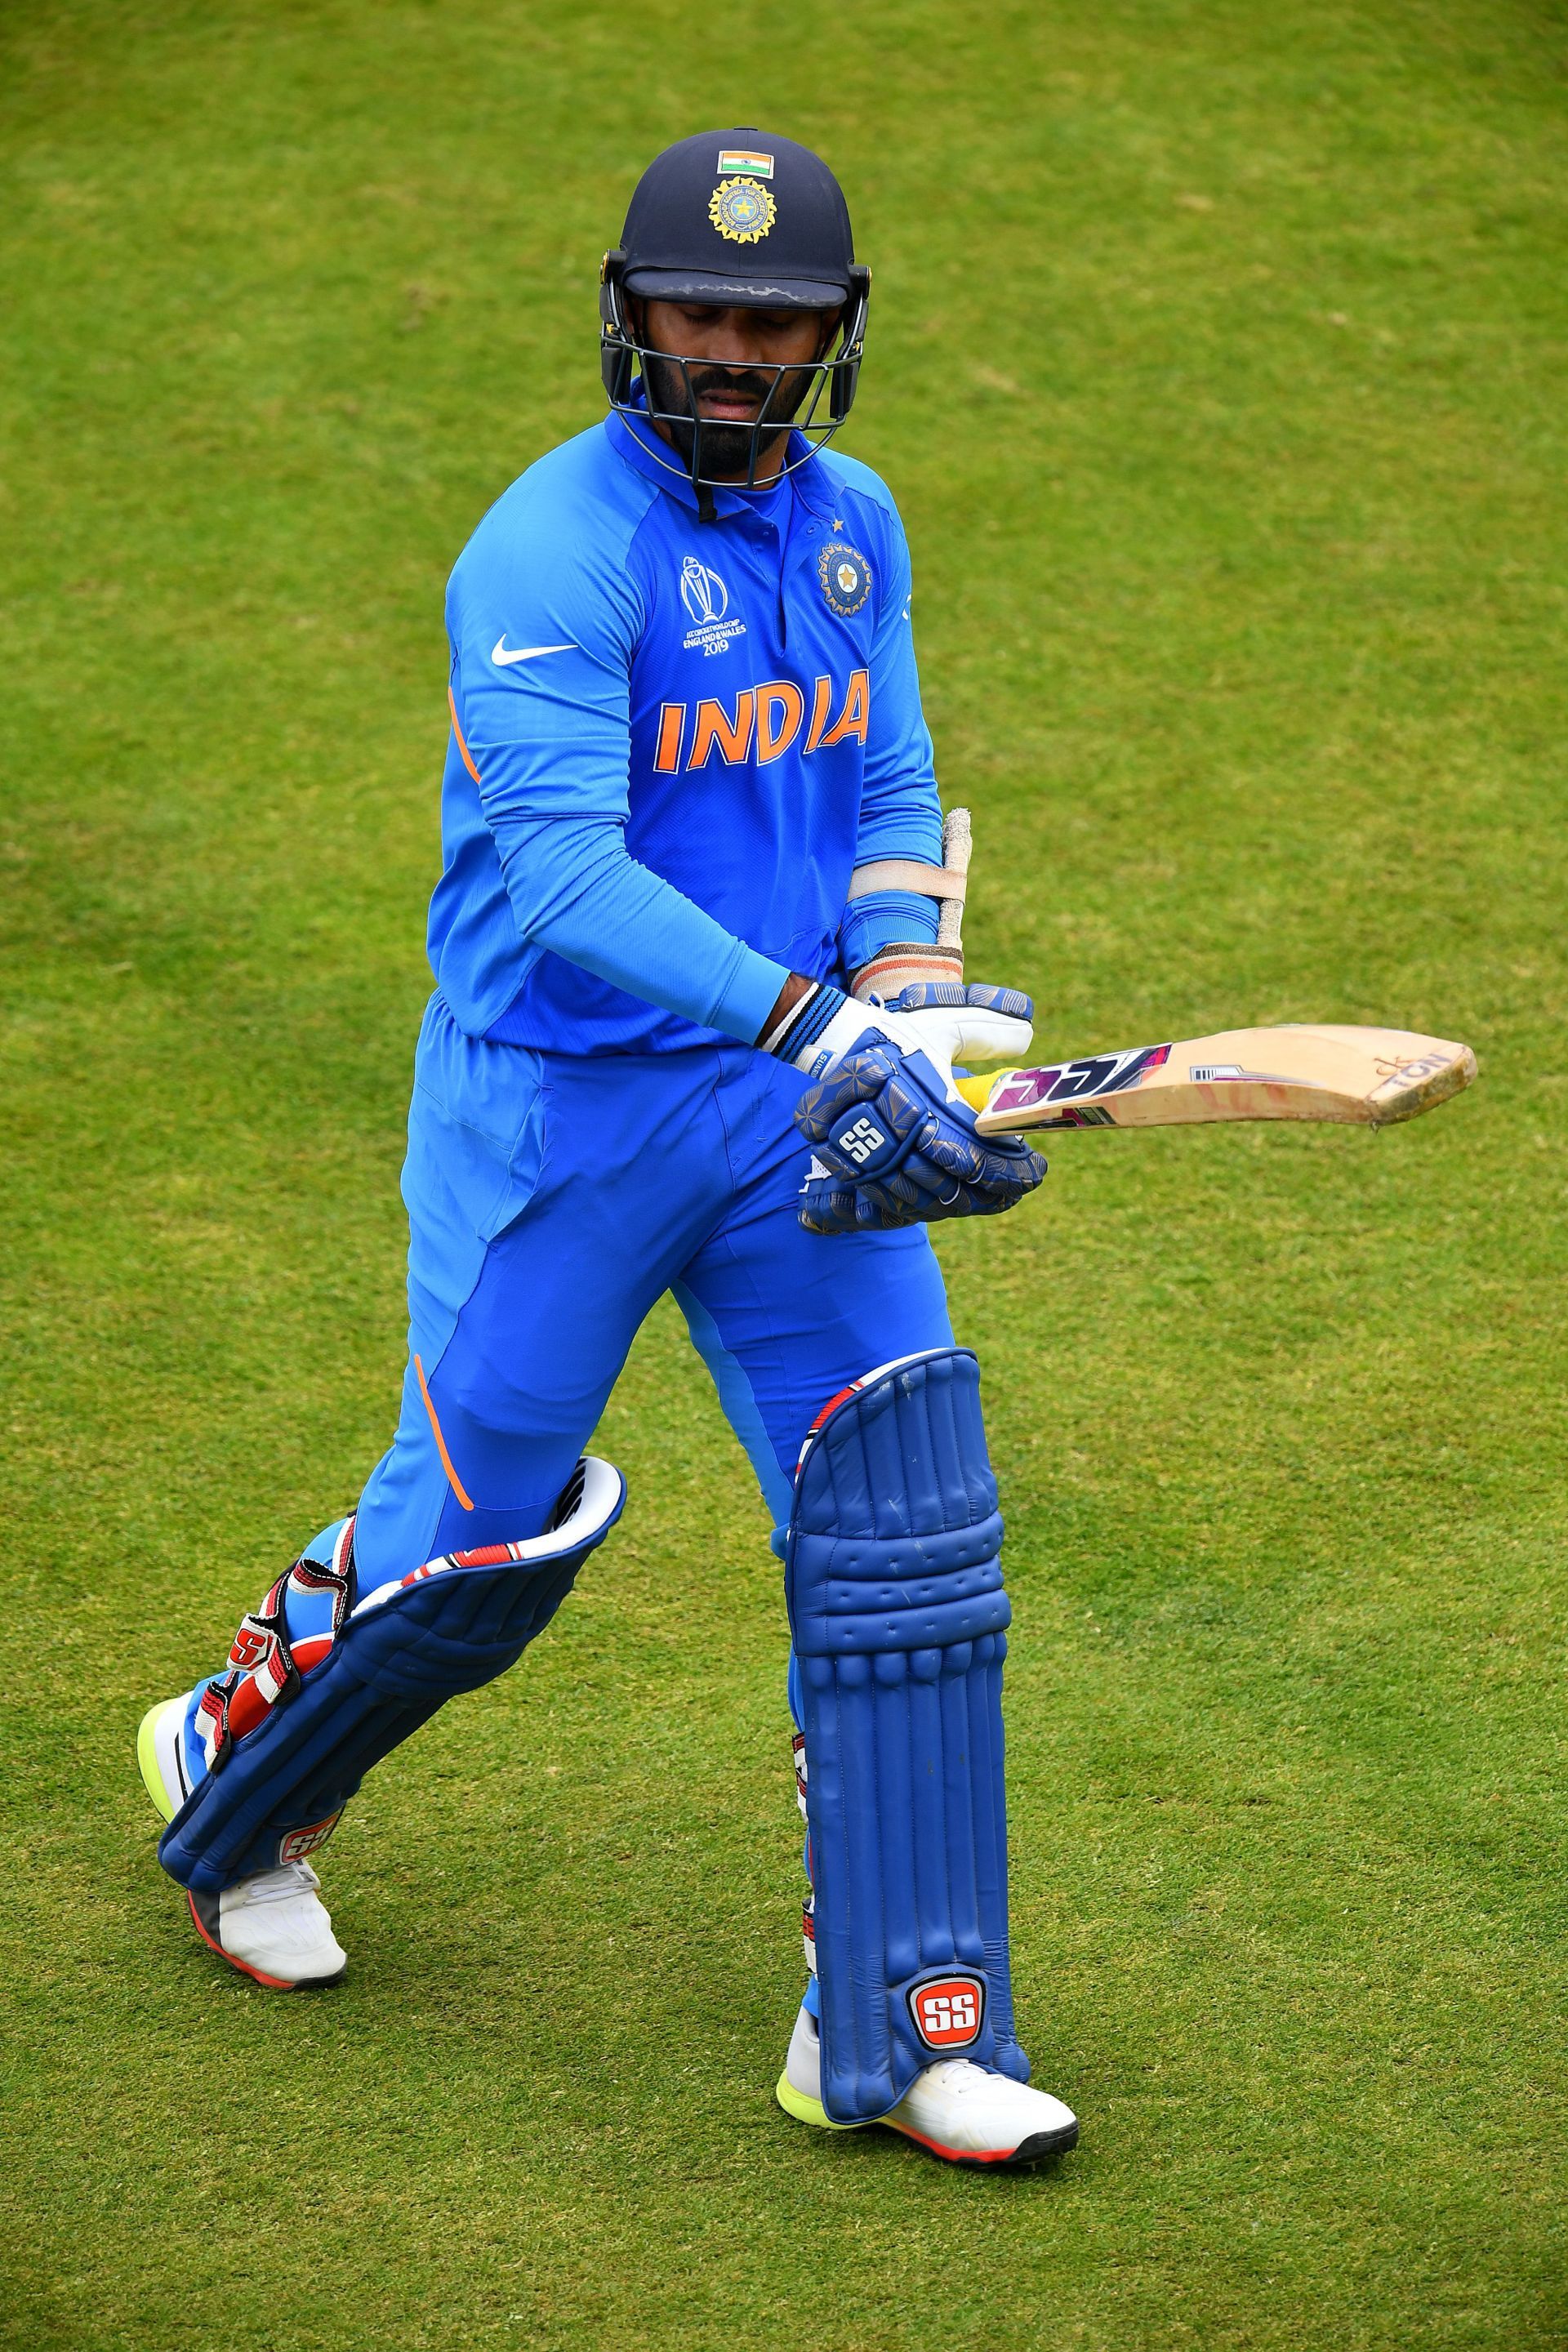 Dinesh Karthik will next be seen in the series against Ireland